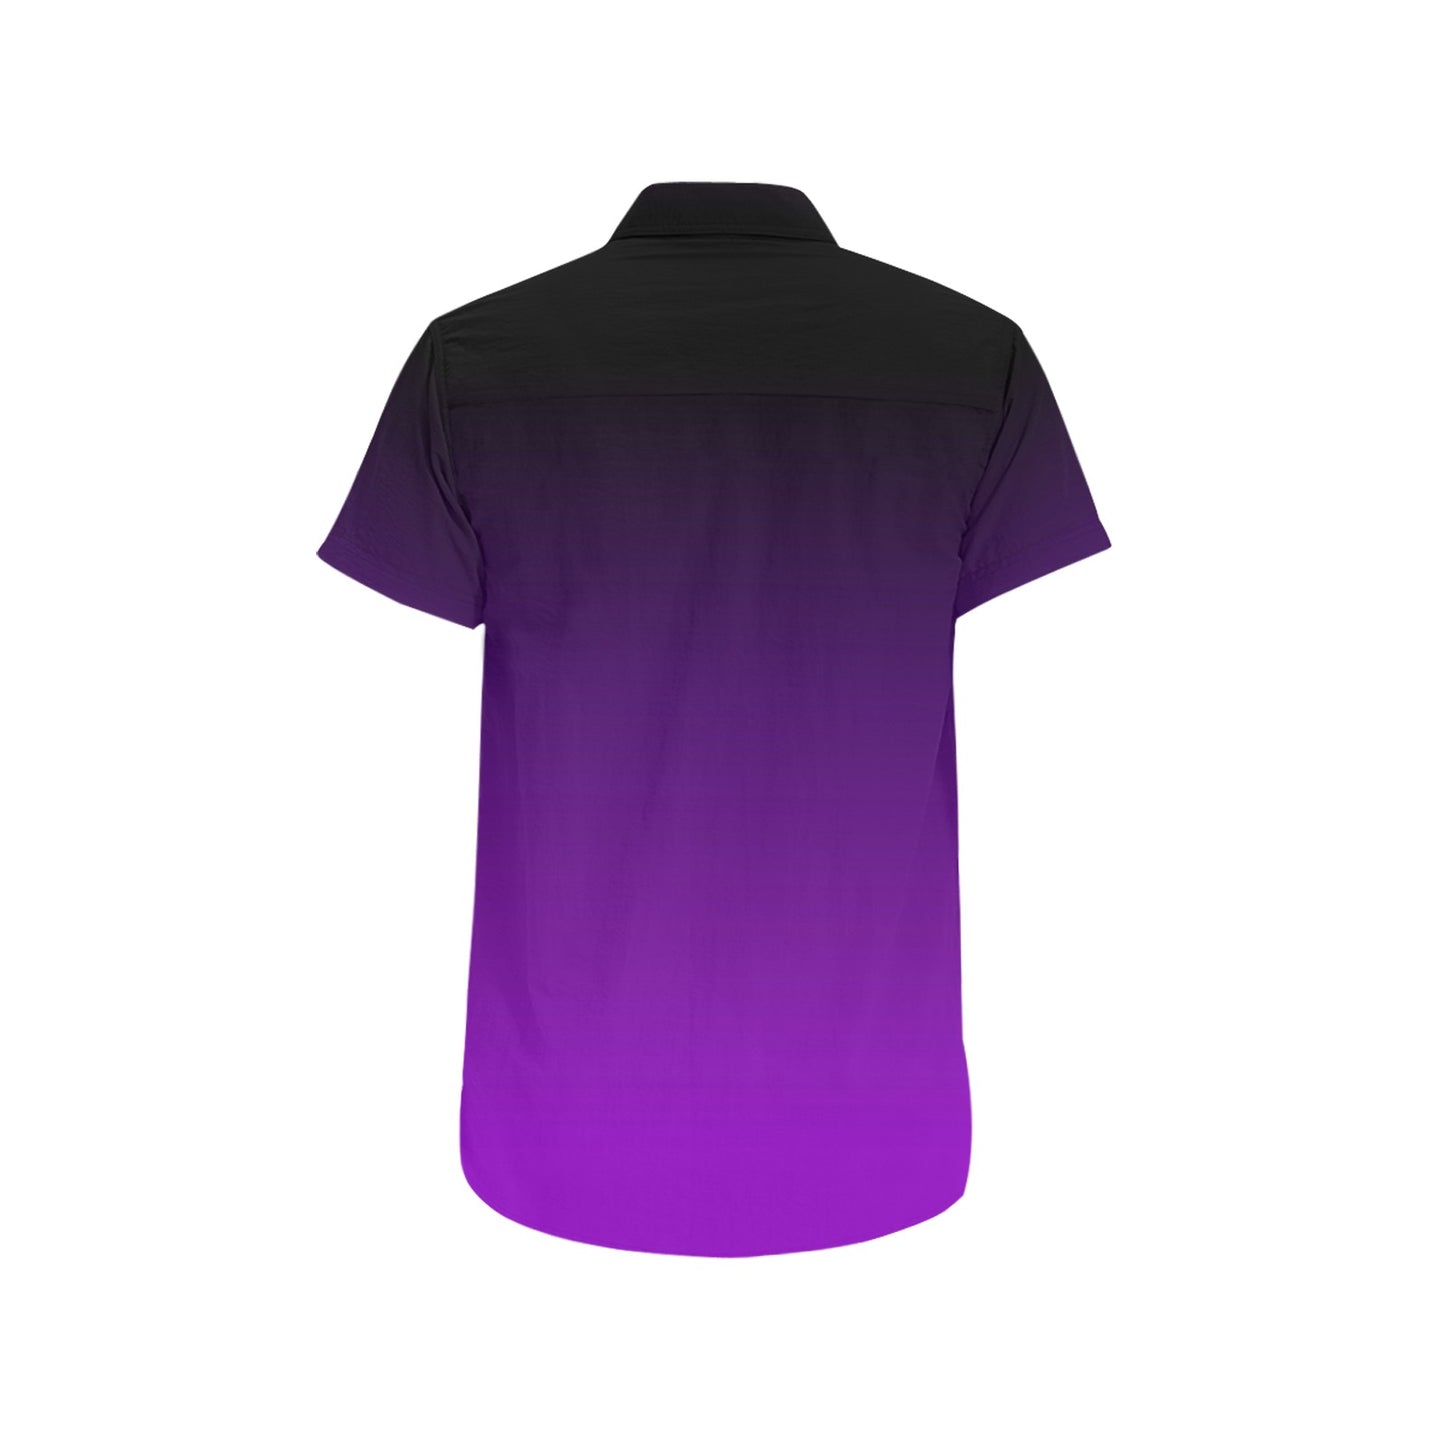 Black and Purple Short Sleeve Men Button Down Shirt, Ombre Tie Dye Gradient Print Casual Buttoned Summer Dress Collared Plus Size